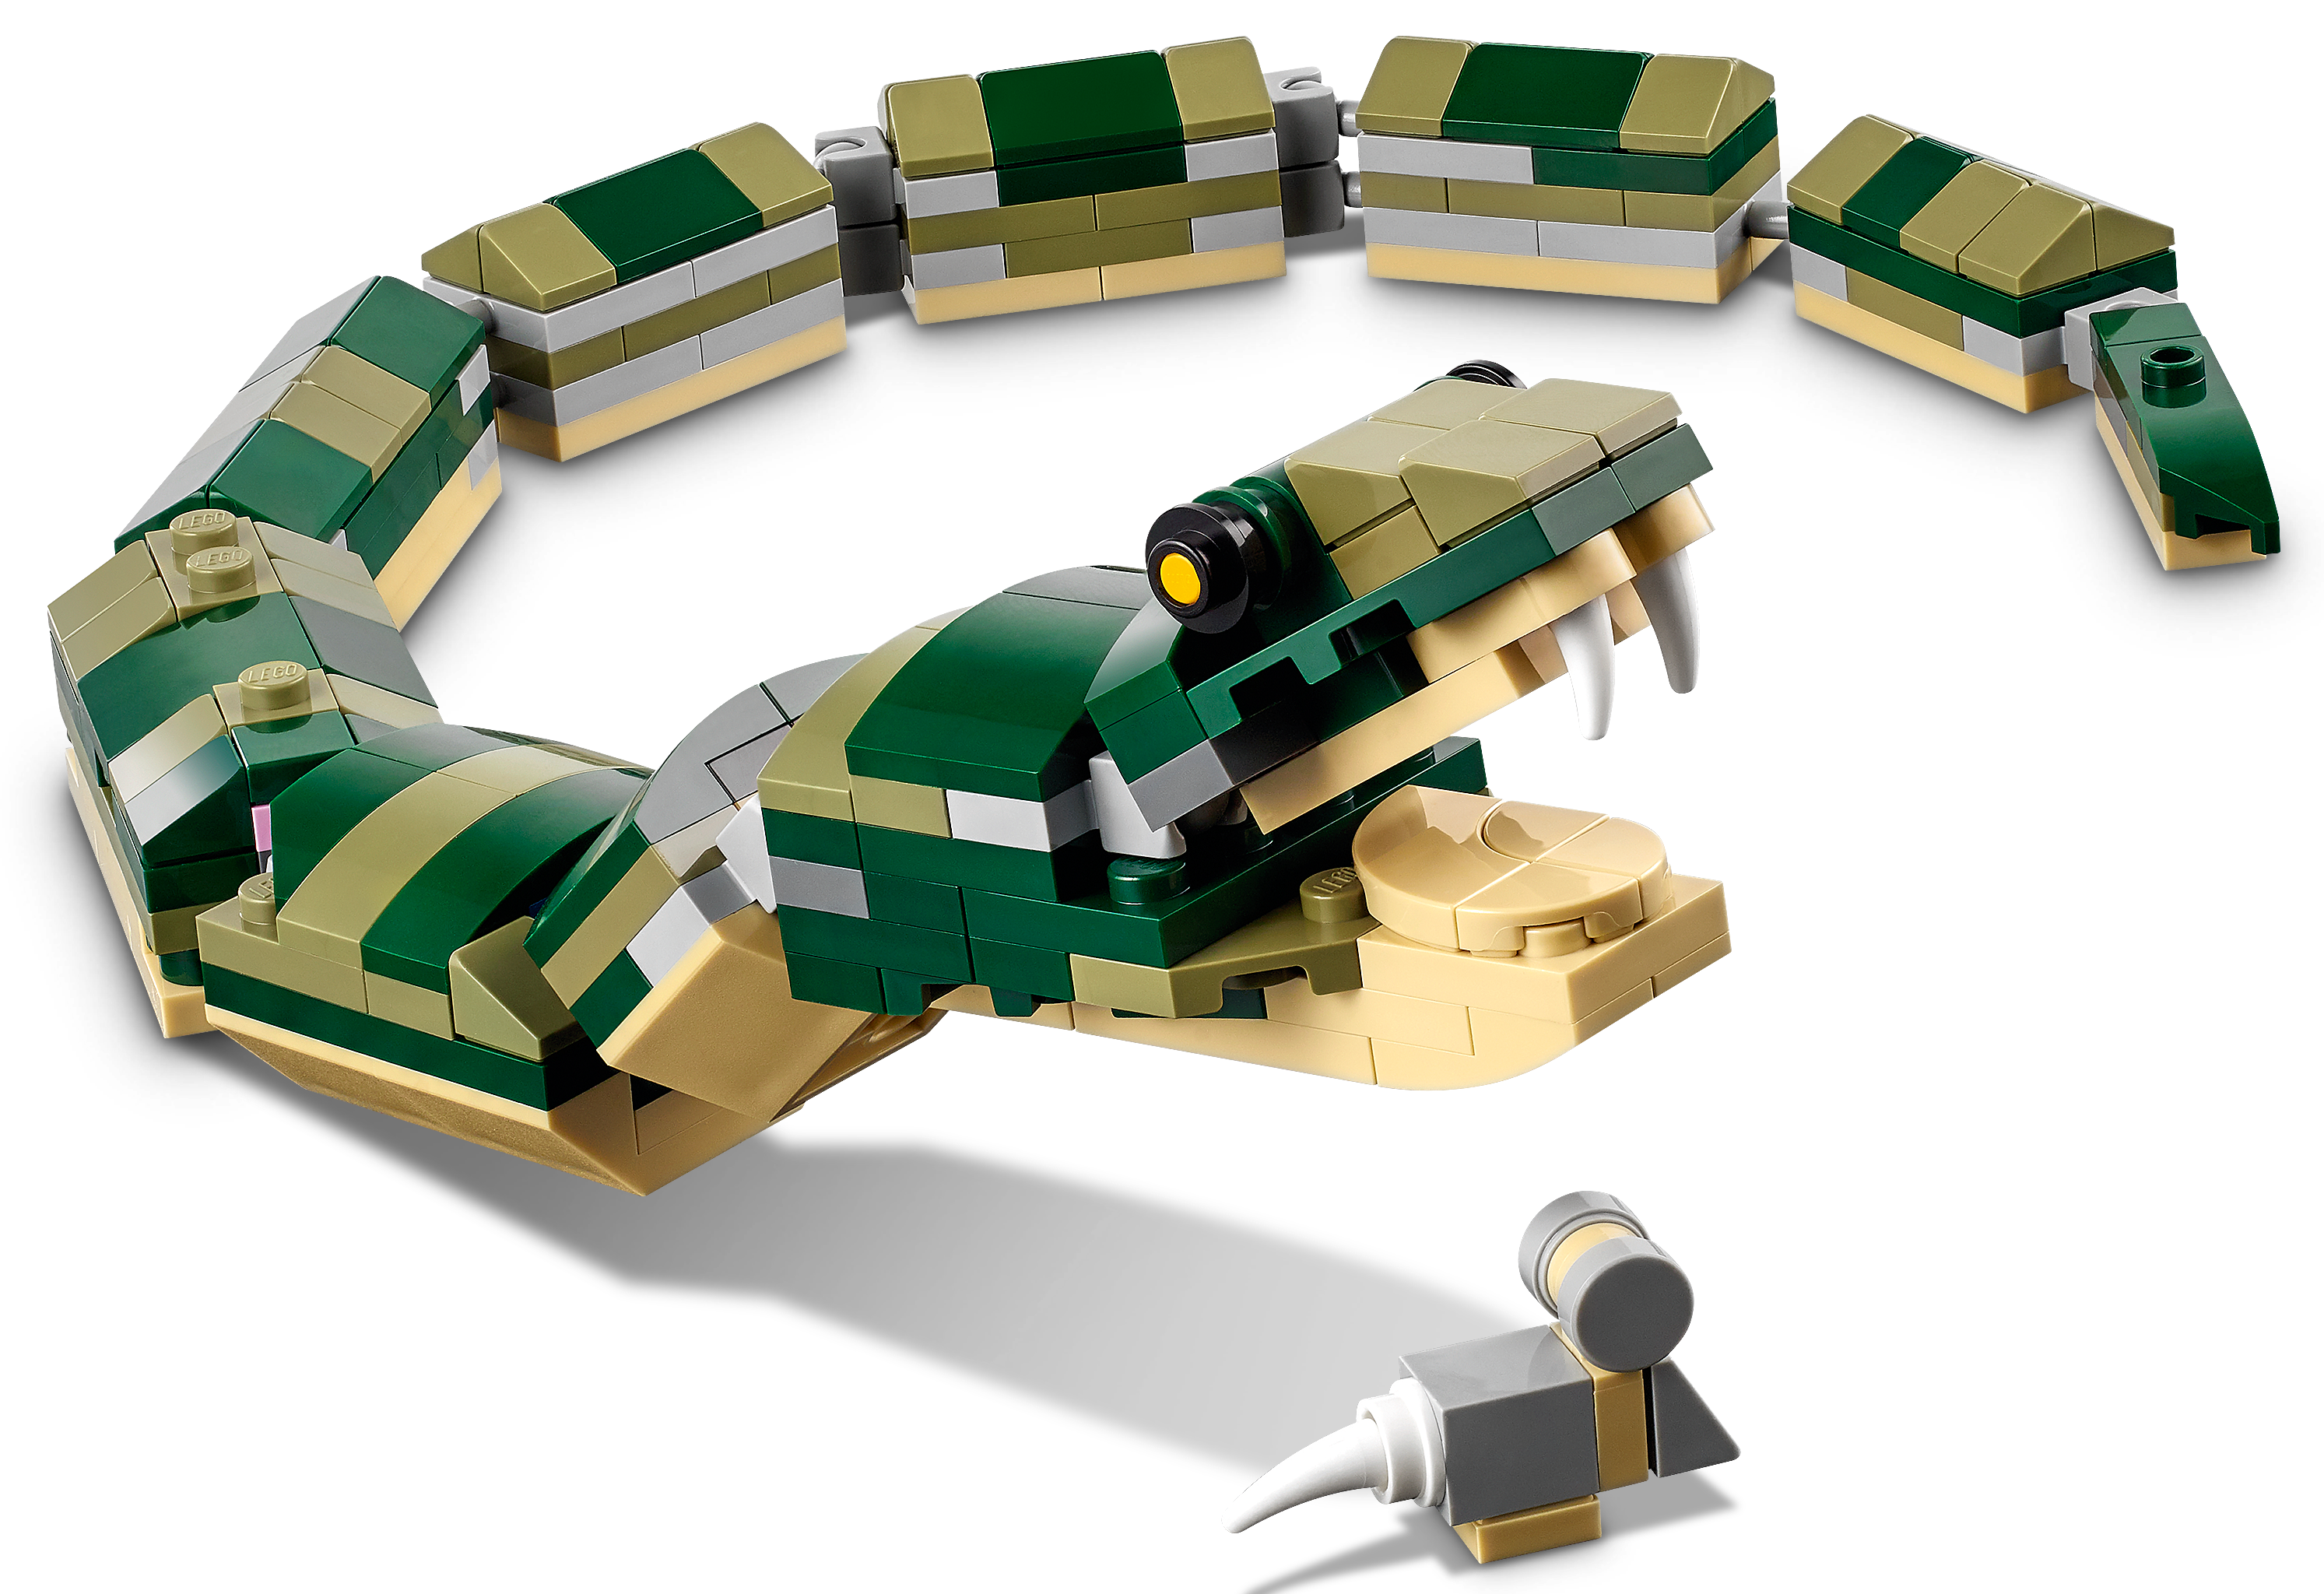 Crocodile 31121 Creator 3-in-1 | Buy online at the Official LEGO® Shop US